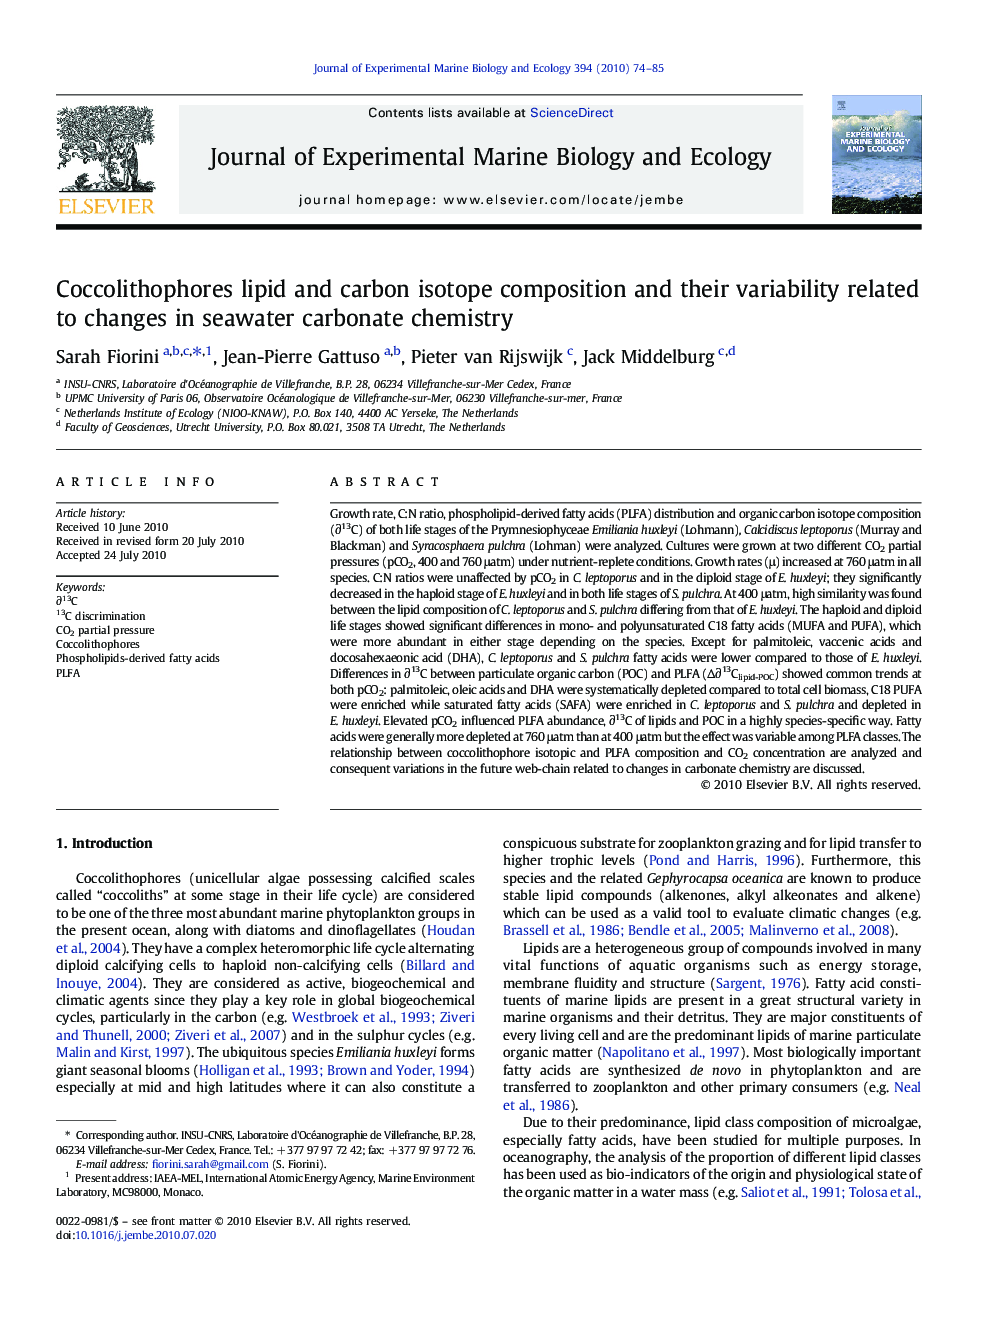 Coccolithophores lipid and carbon isotope composition and their variability related to changes in seawater carbonate chemistry